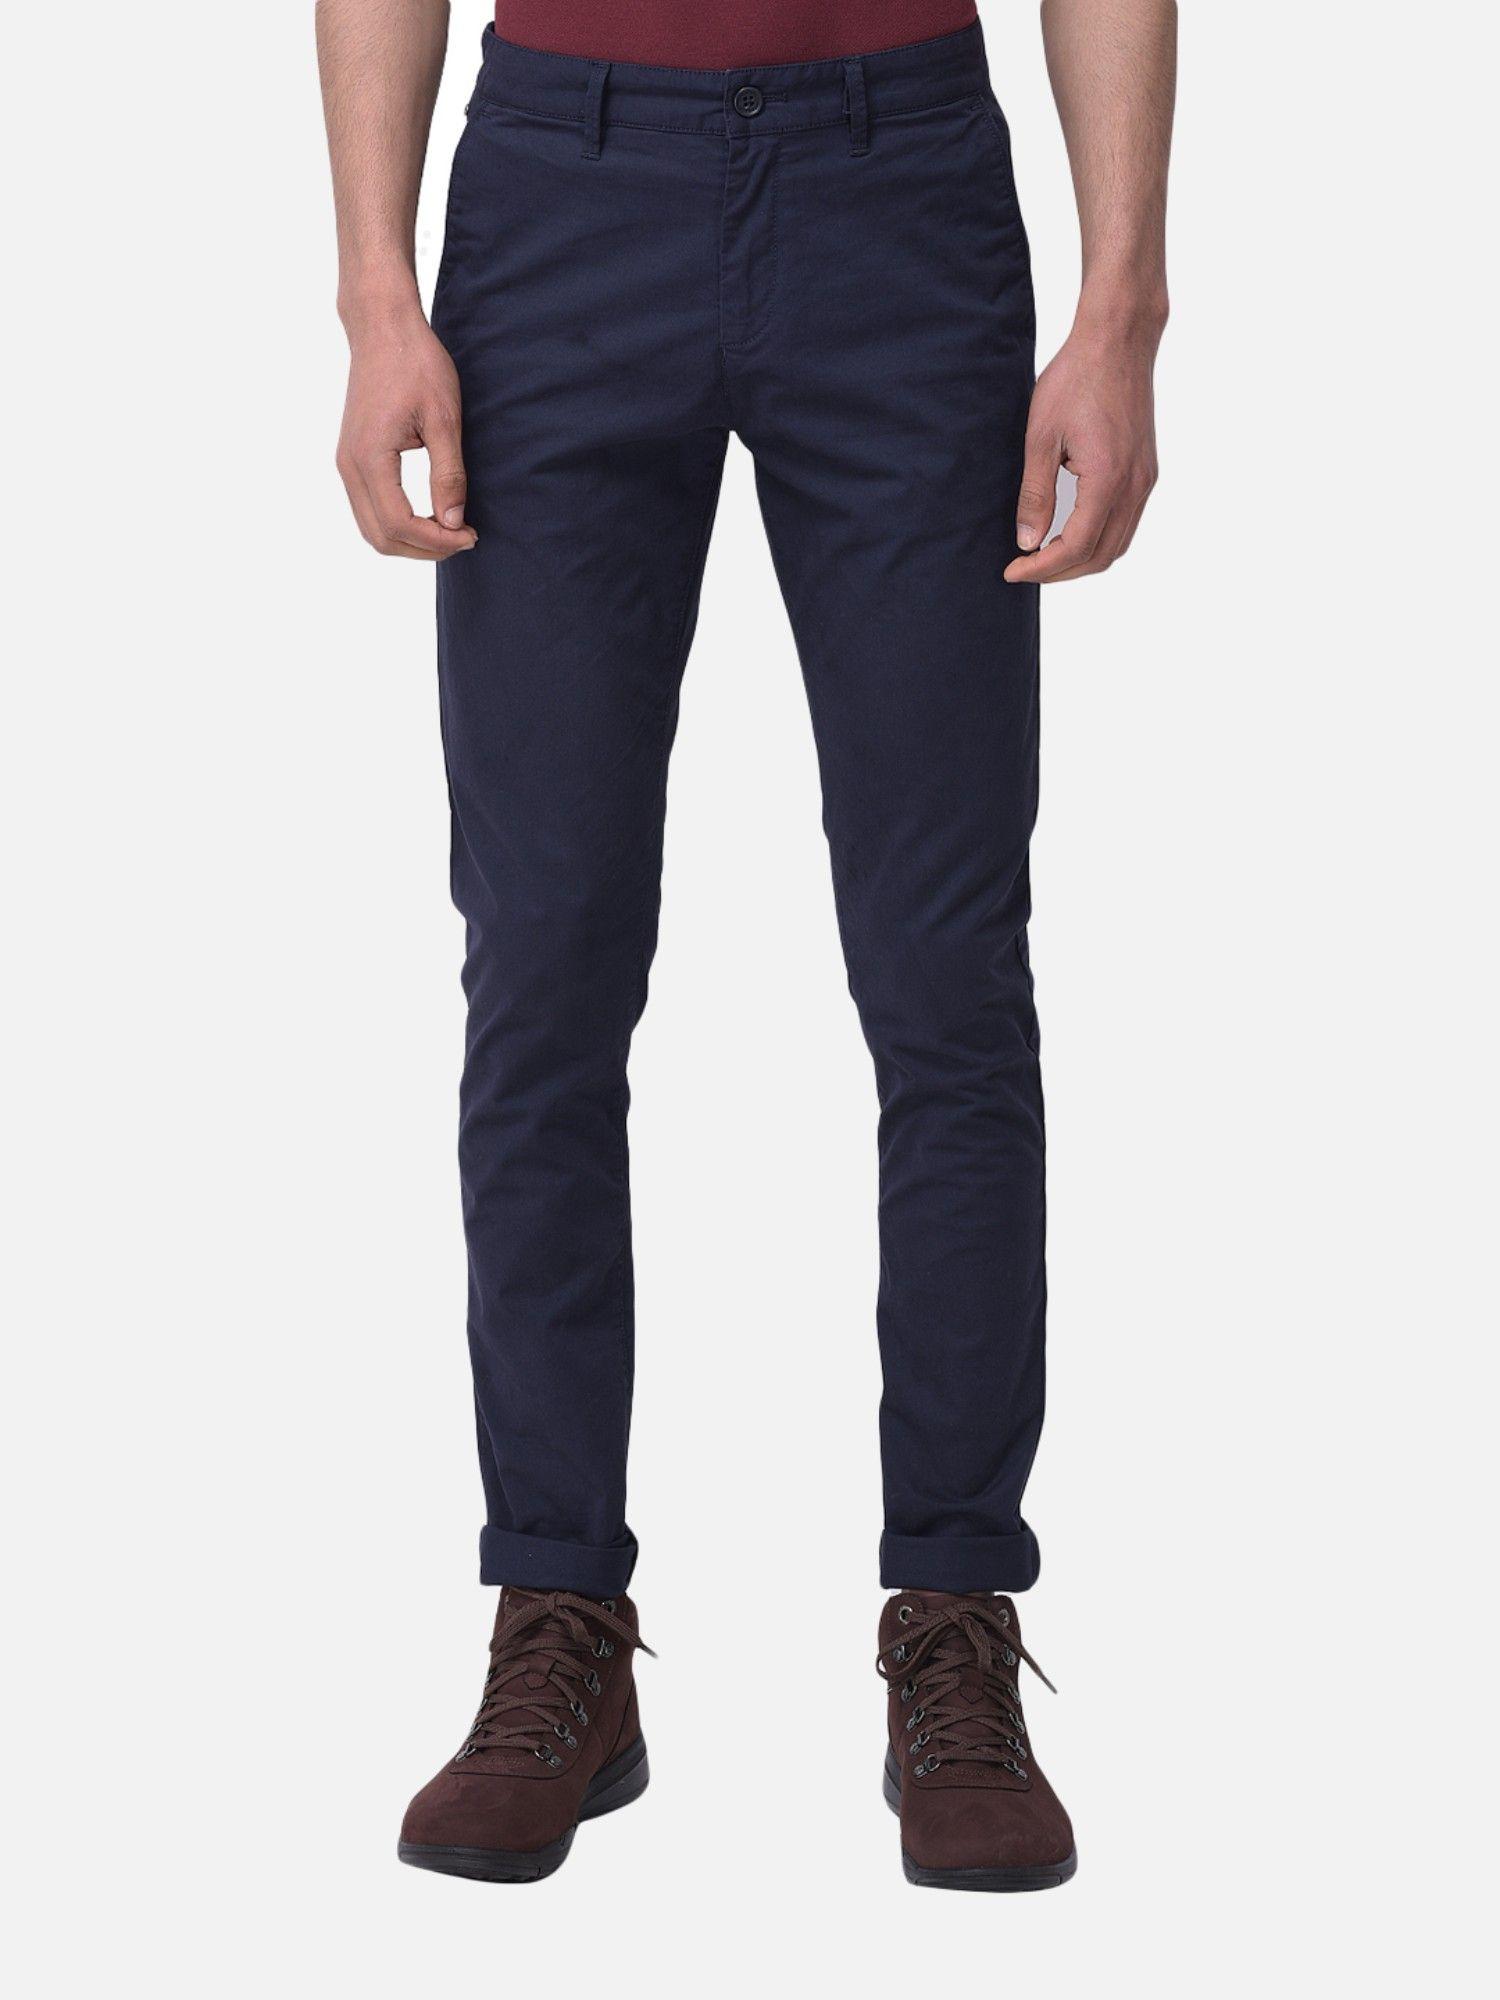 navy blue solid chinos